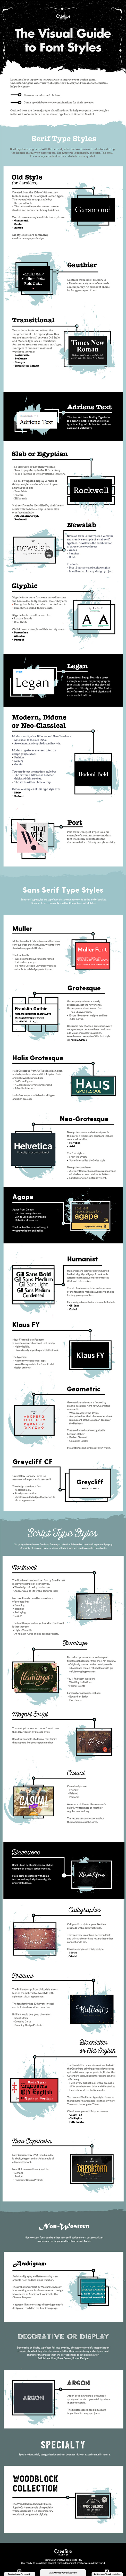 Visual Guide to Font Styles